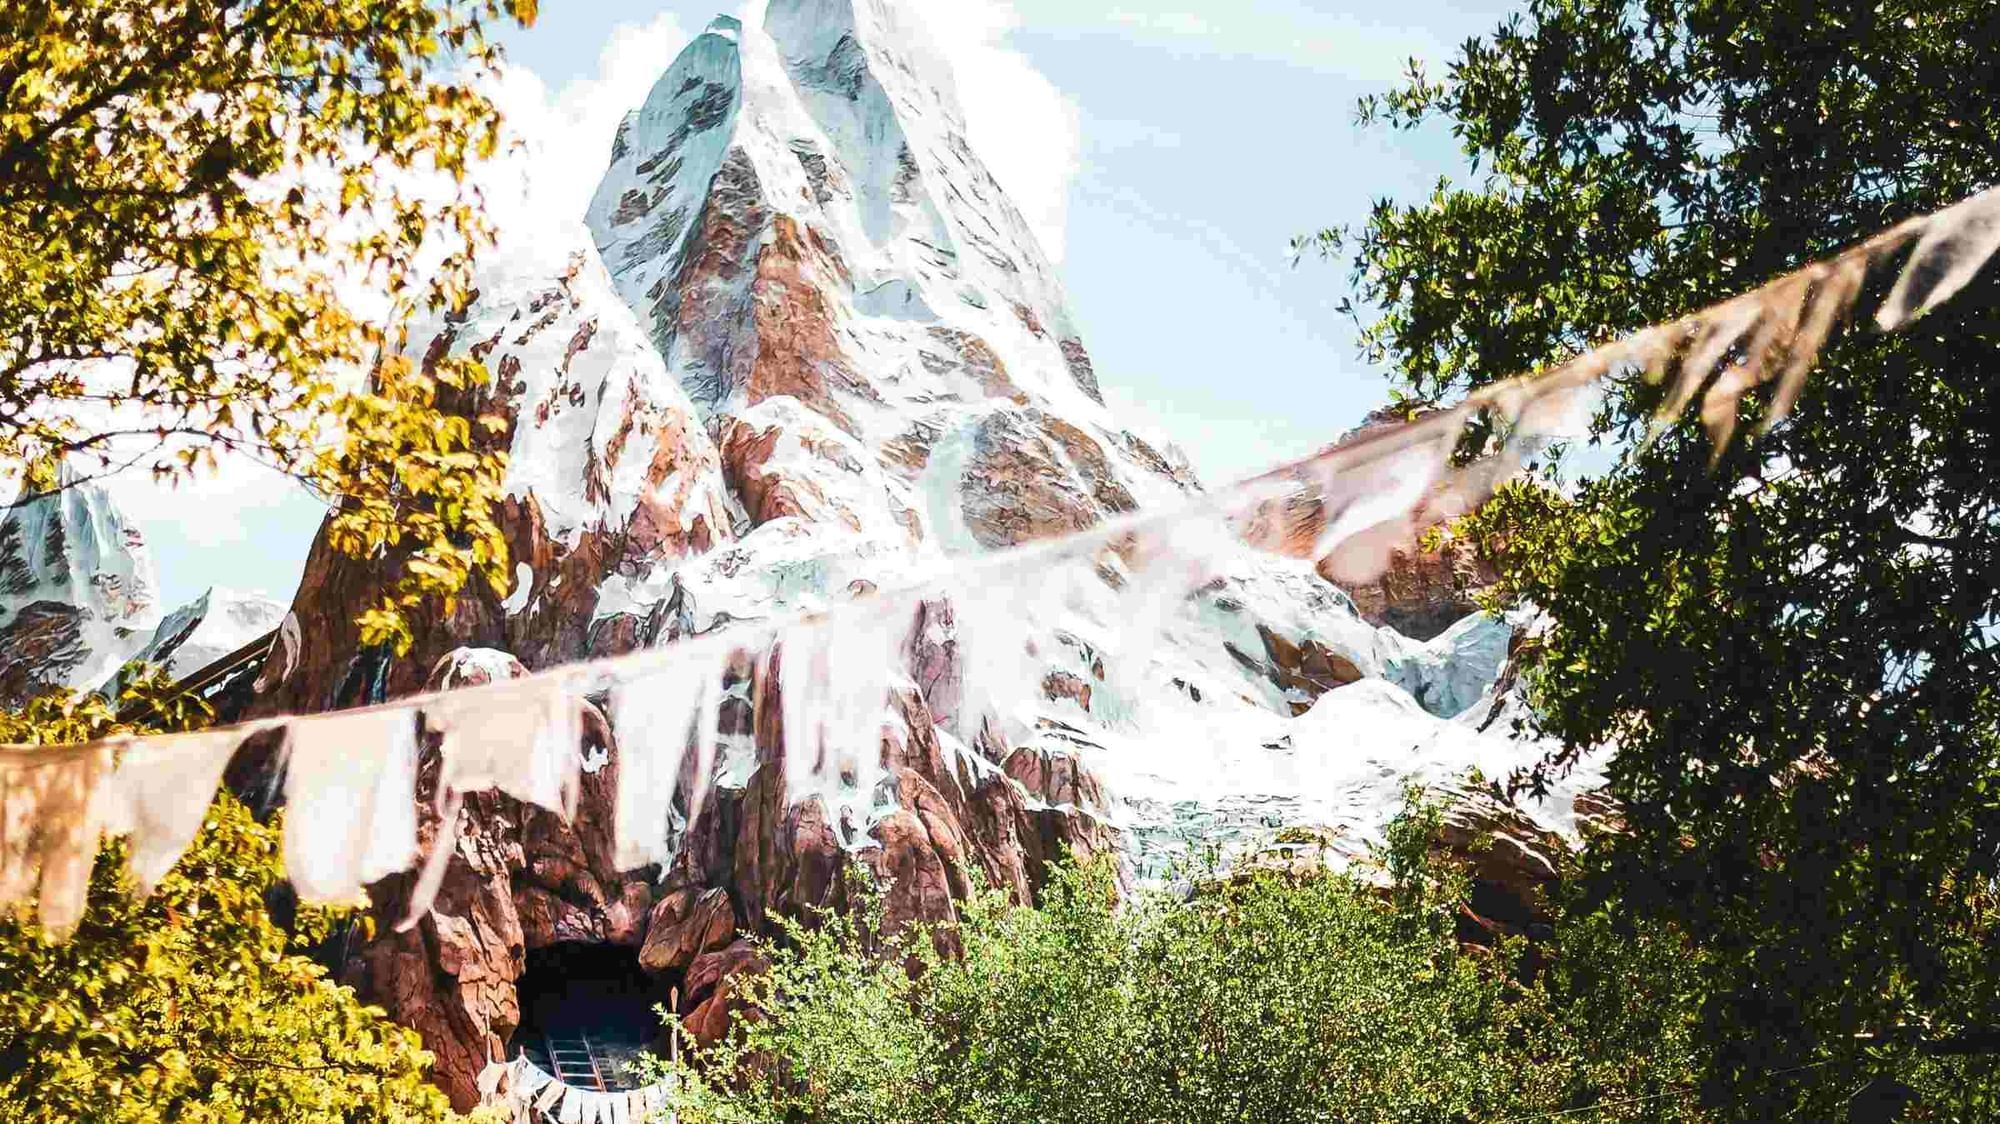 Expedition Everest  - Legend of the Forbidden Mountain a thrilling ride at Walt Disney World Resort